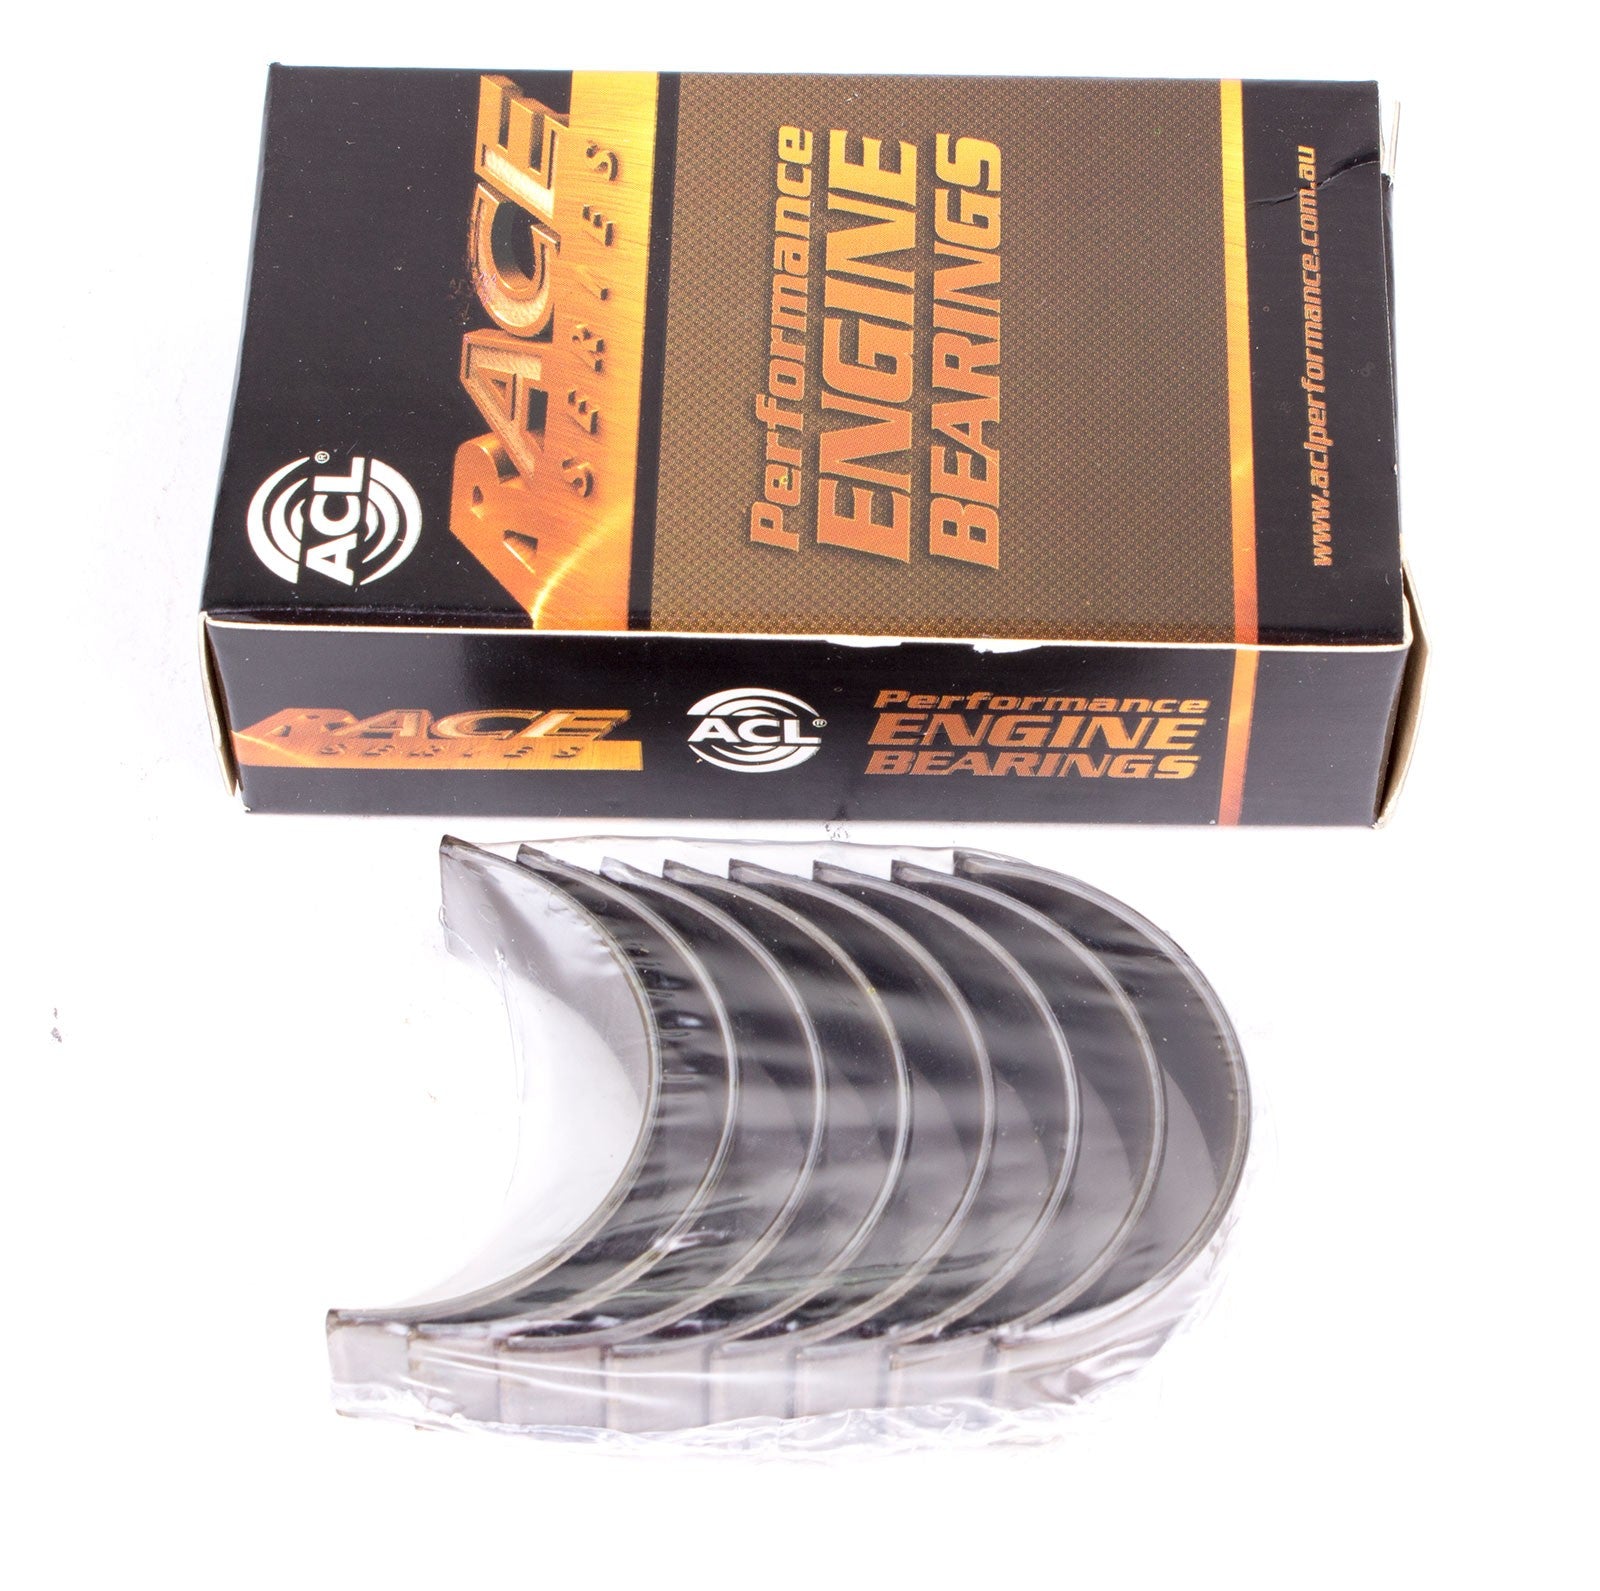 ACL 5M1743H-10 Main bearing set (ACL Race Series) Photo-0 